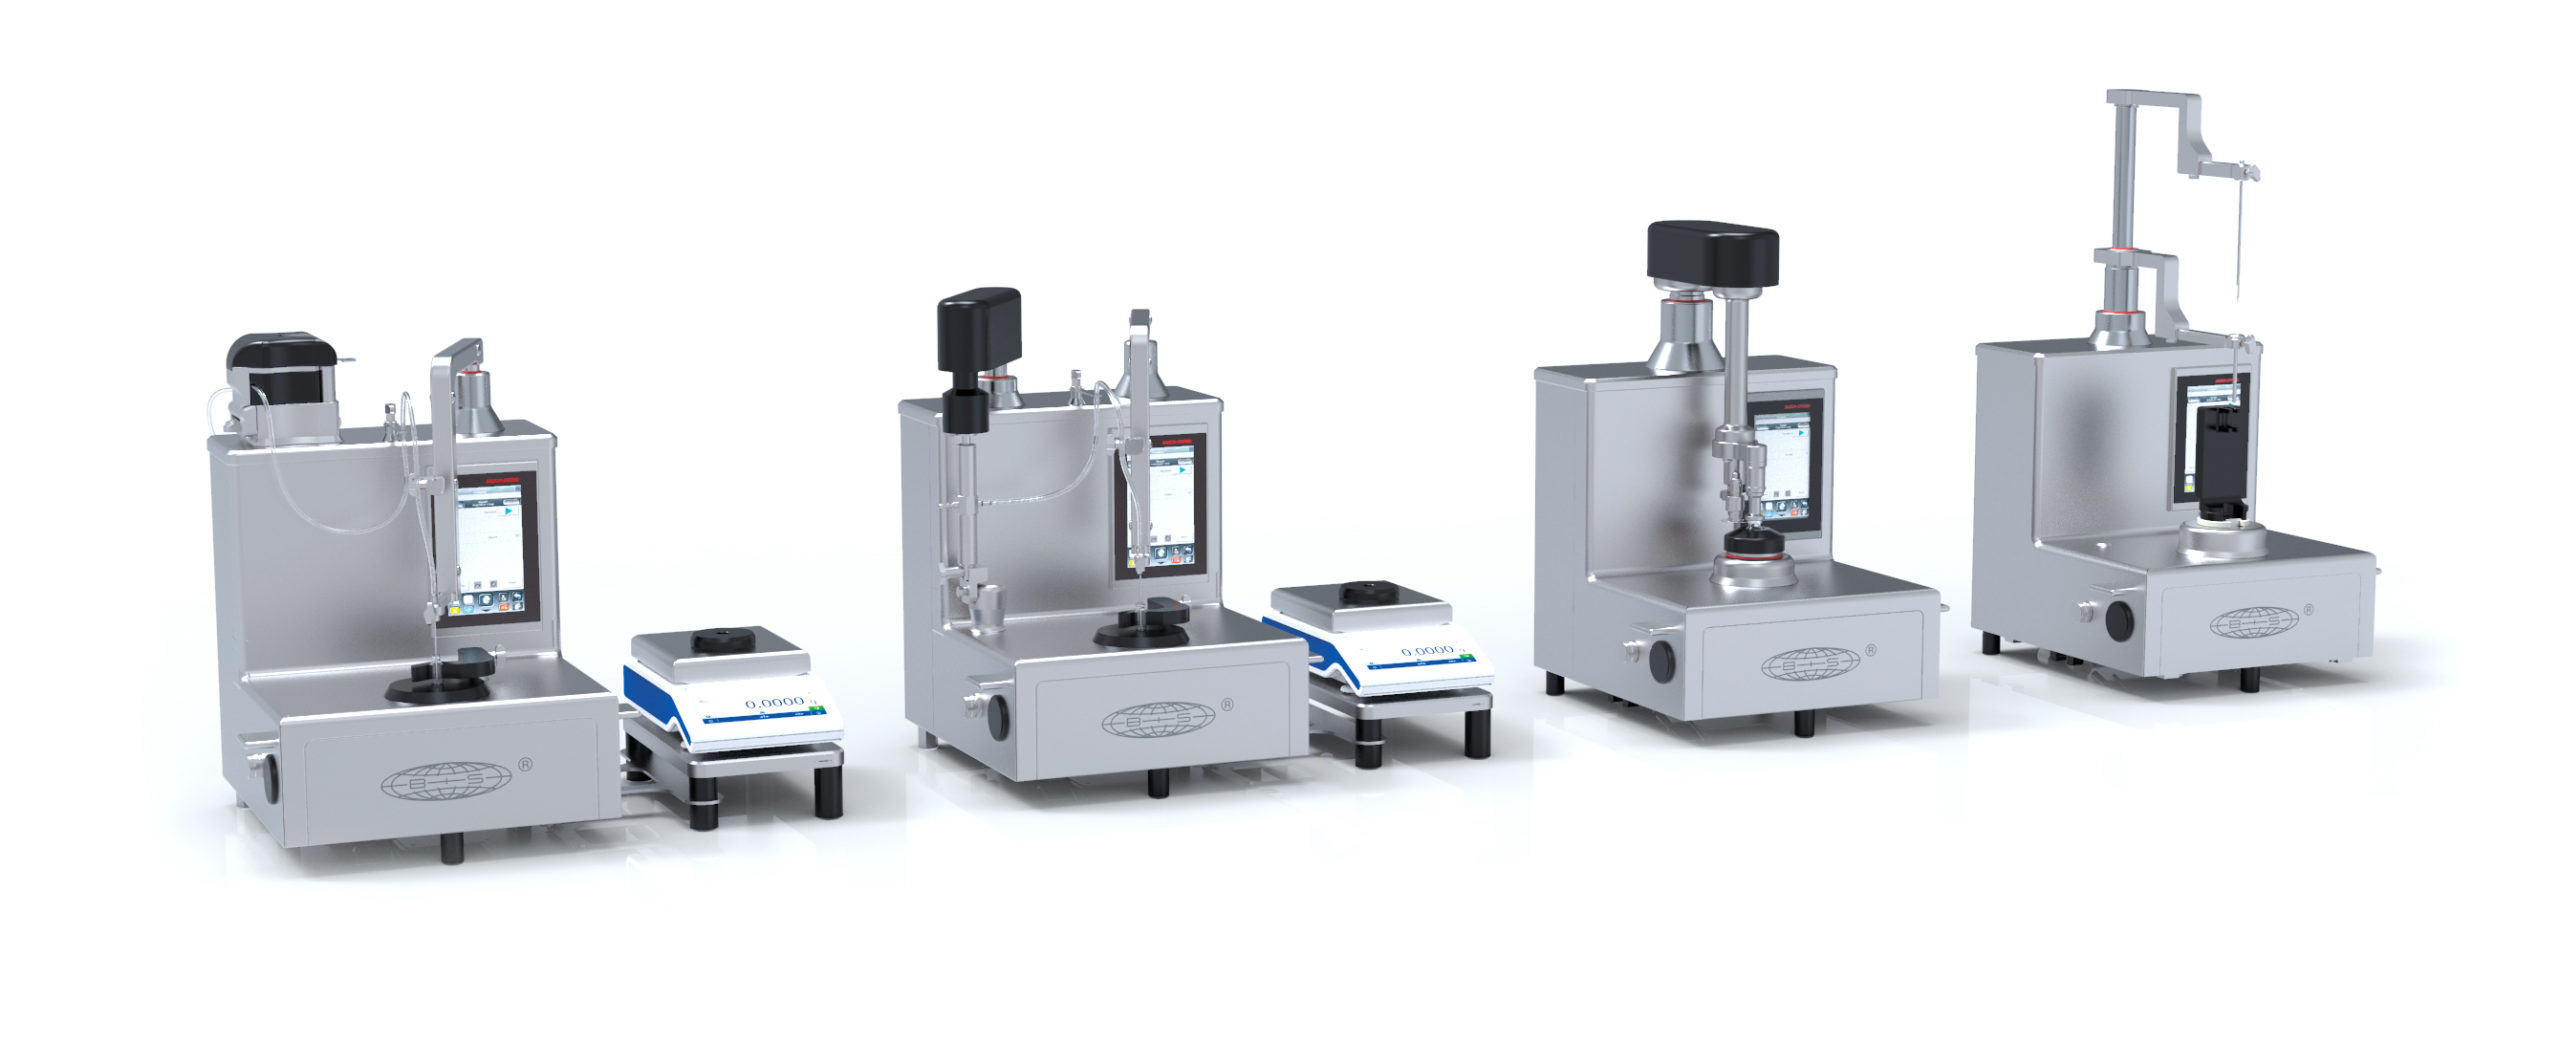 Litech - supplier to the pharmaceutical industry for the brand Bausch + Ströbel